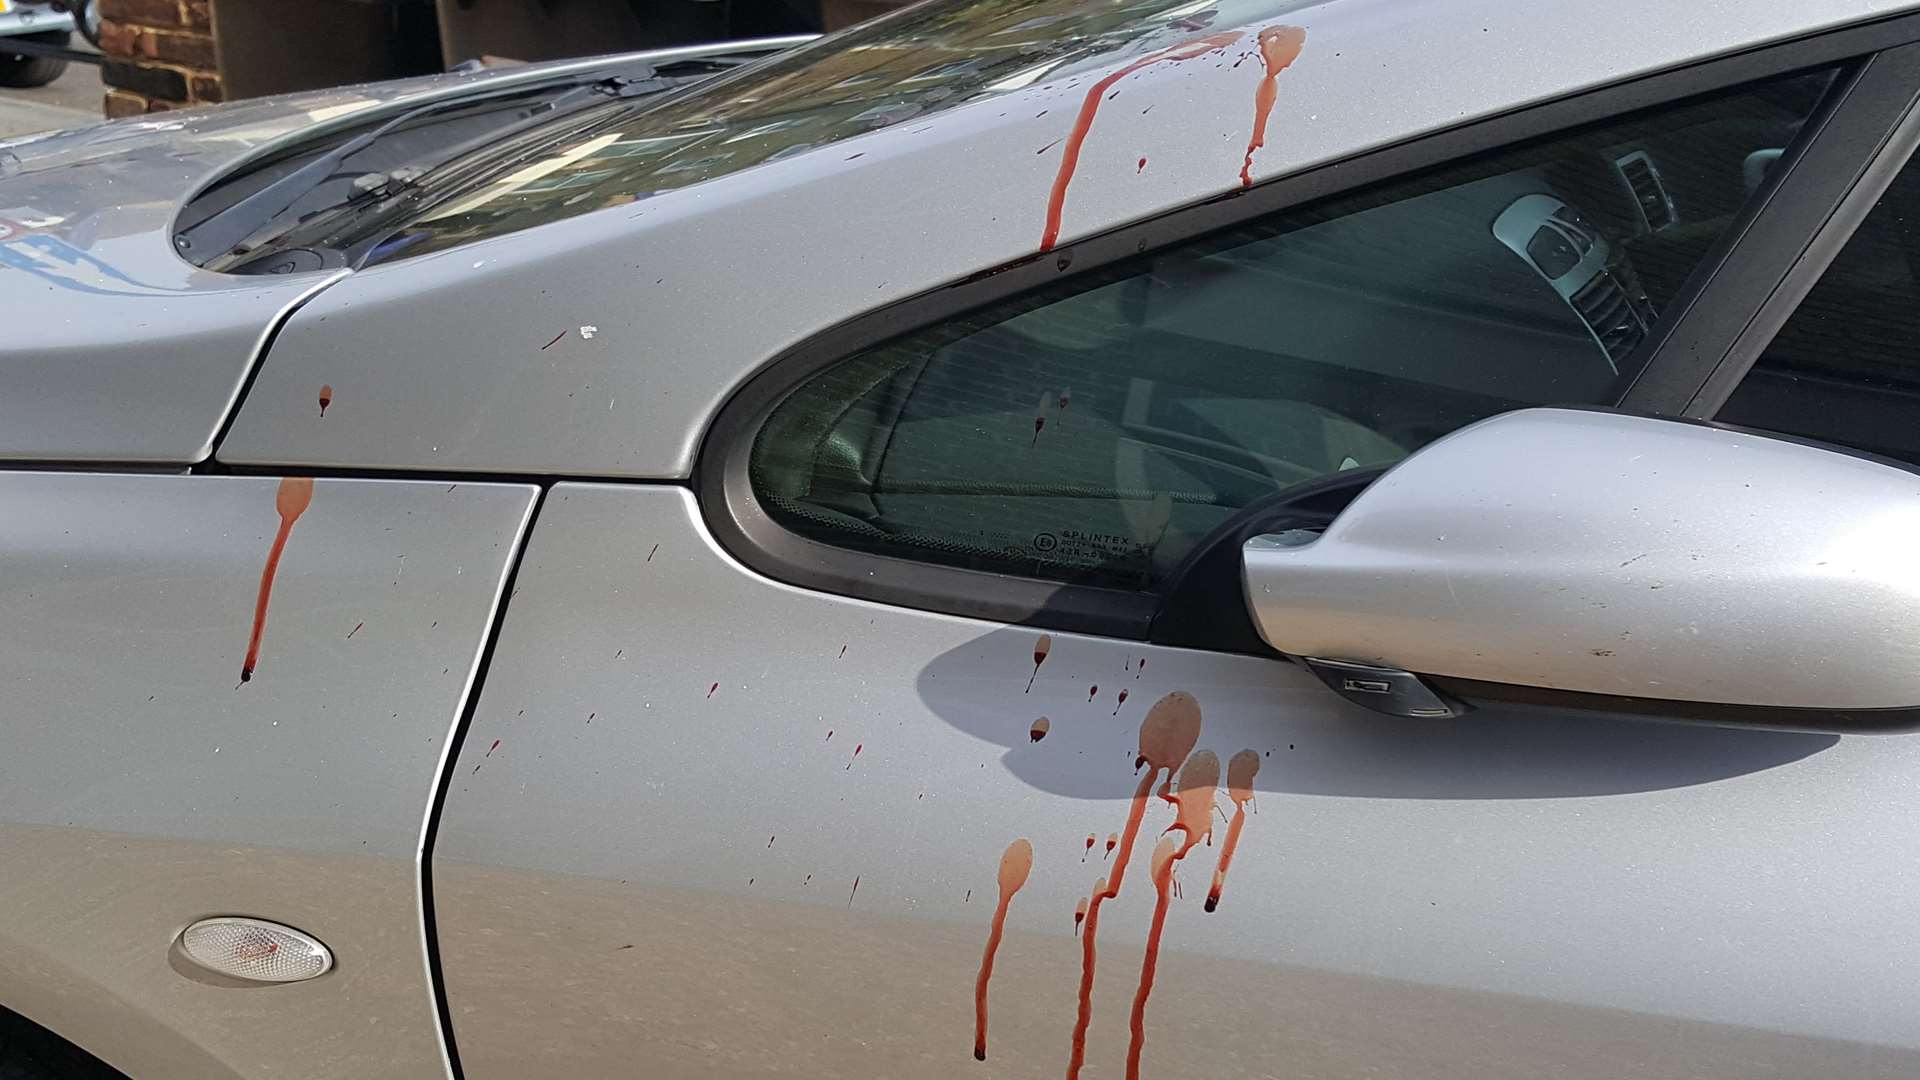 Blood on a nearby car